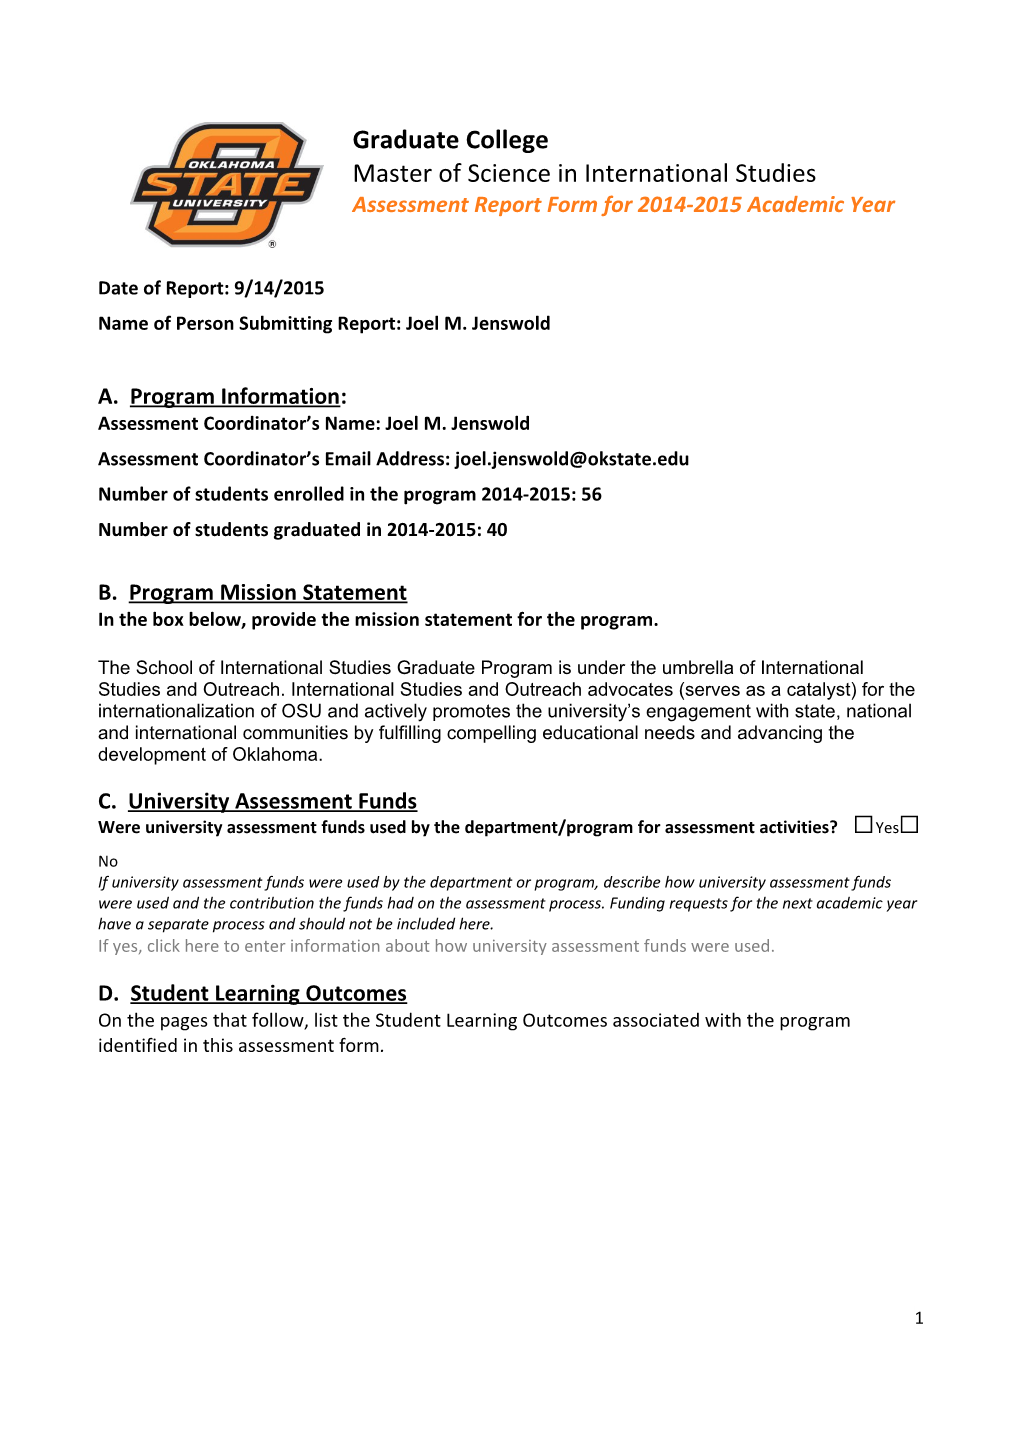 Assessment Report Form for 2014-2015 Academic Year